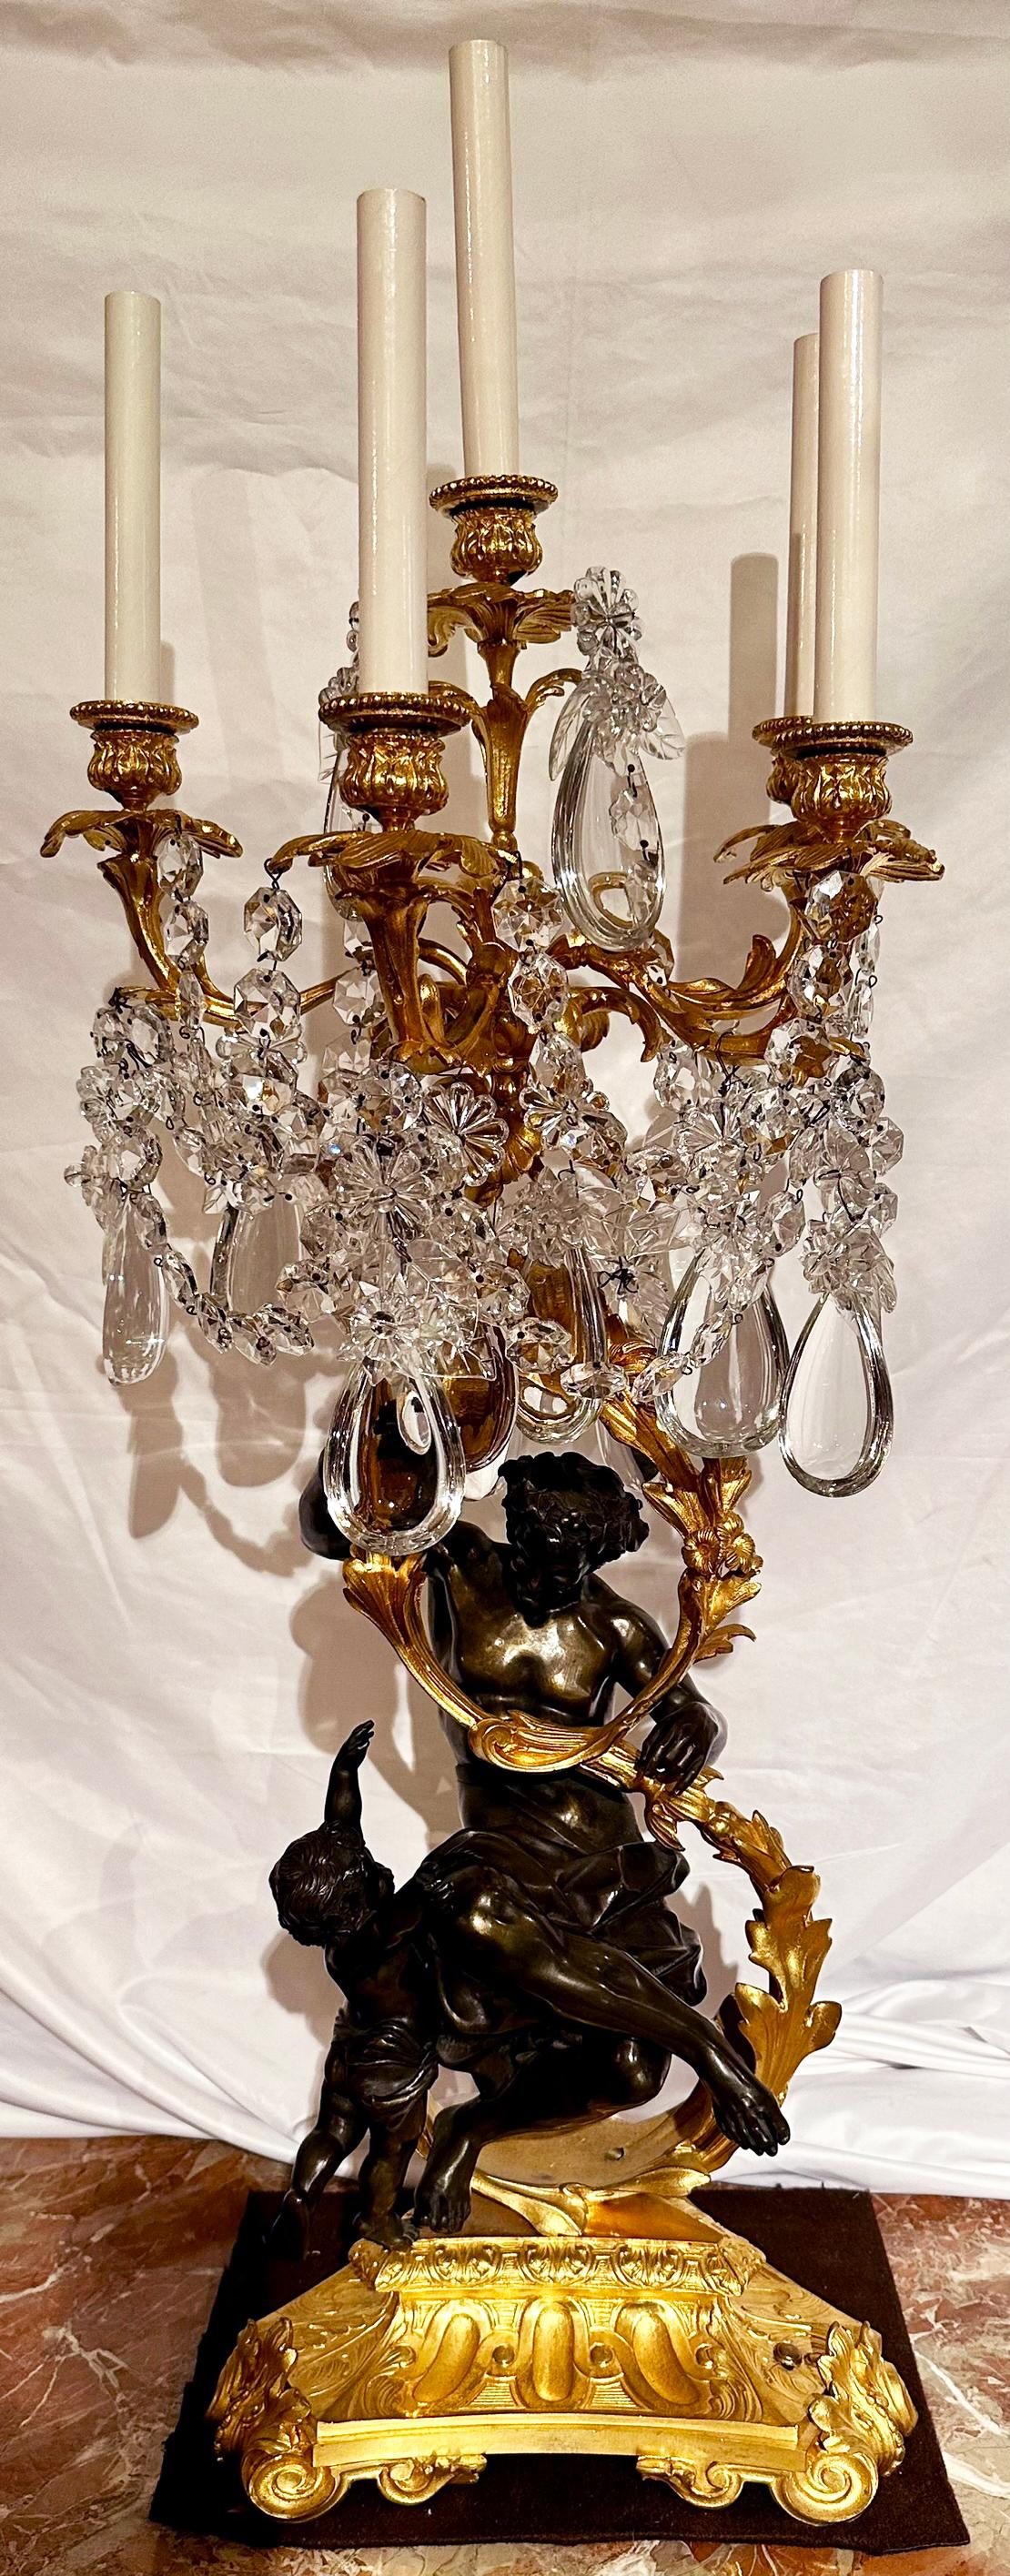 Pair Magnificent Antique French Napoleon III Baccarat Crystal and Gold Bronze Candelabra with Patinated Bronze Bacchanalian Figures, Circa 1860.